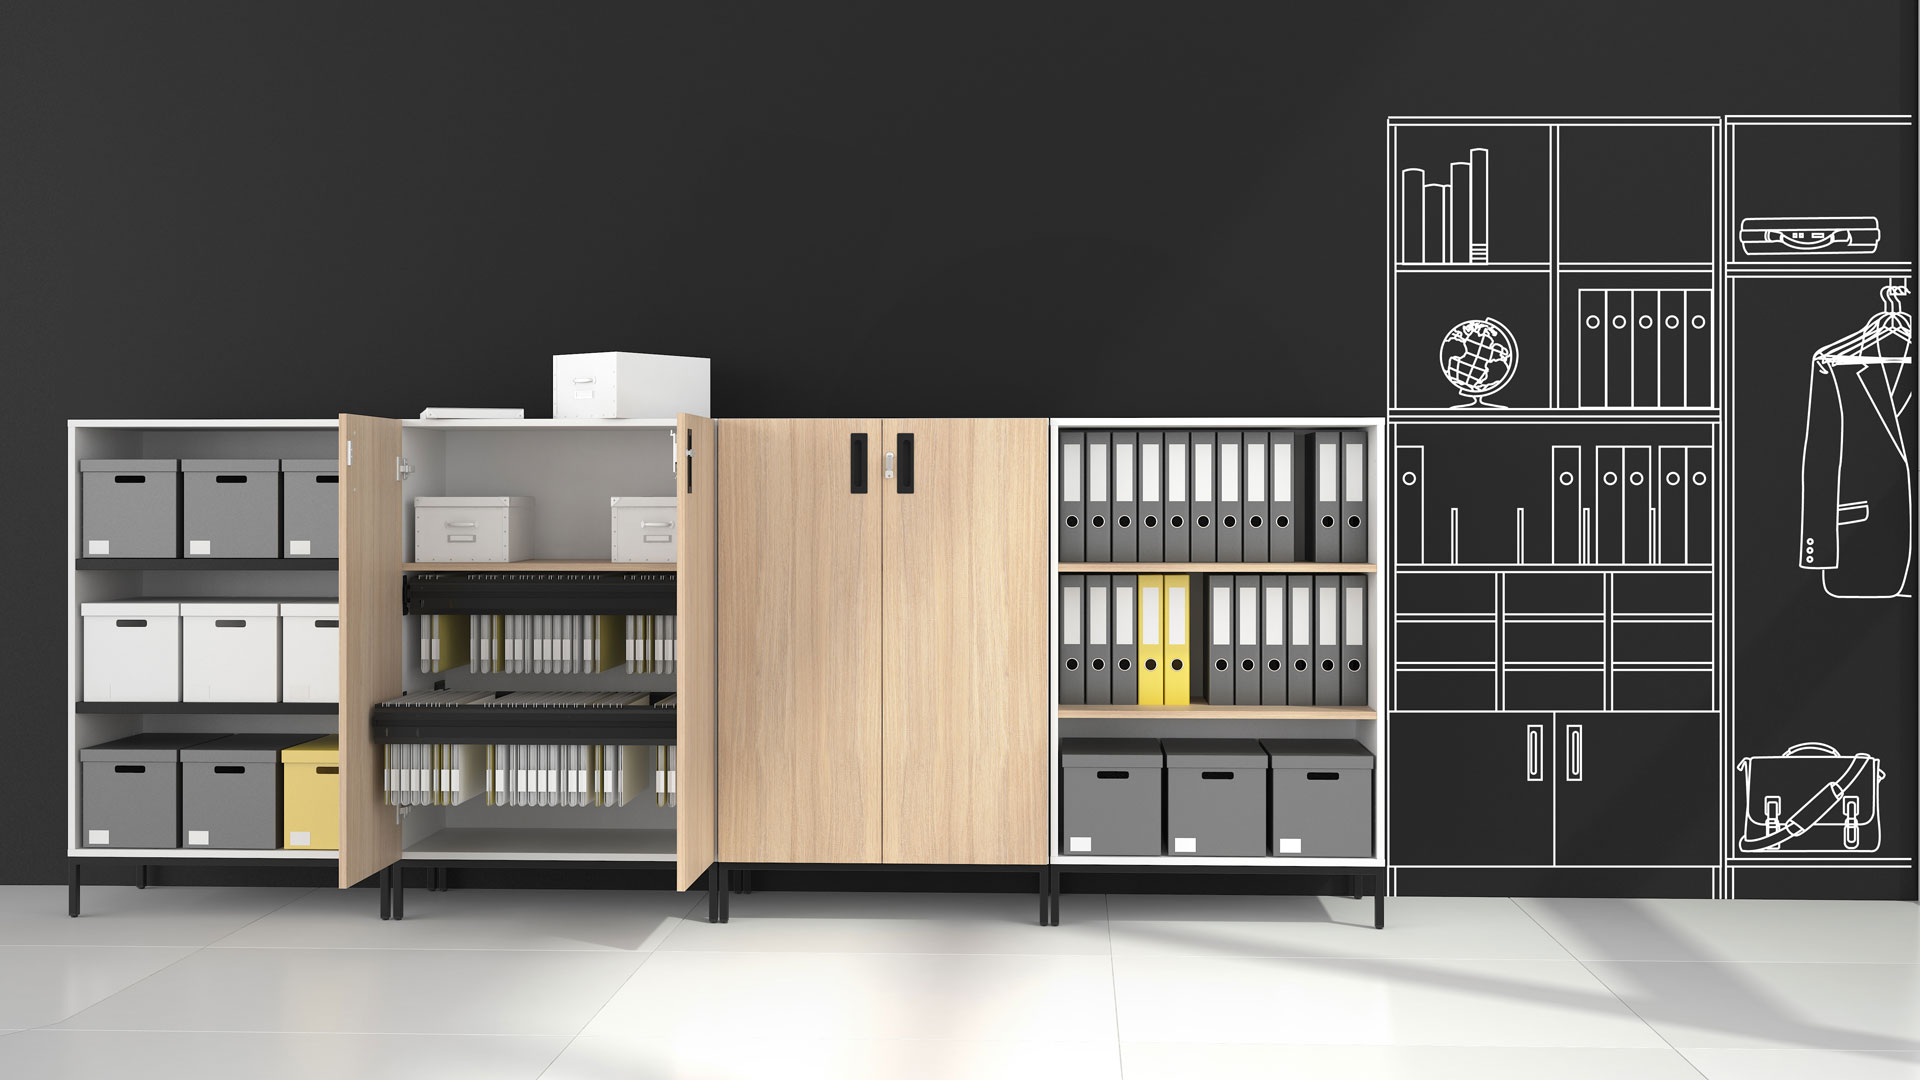 Choice modular storage system includes cabinets and bookcases